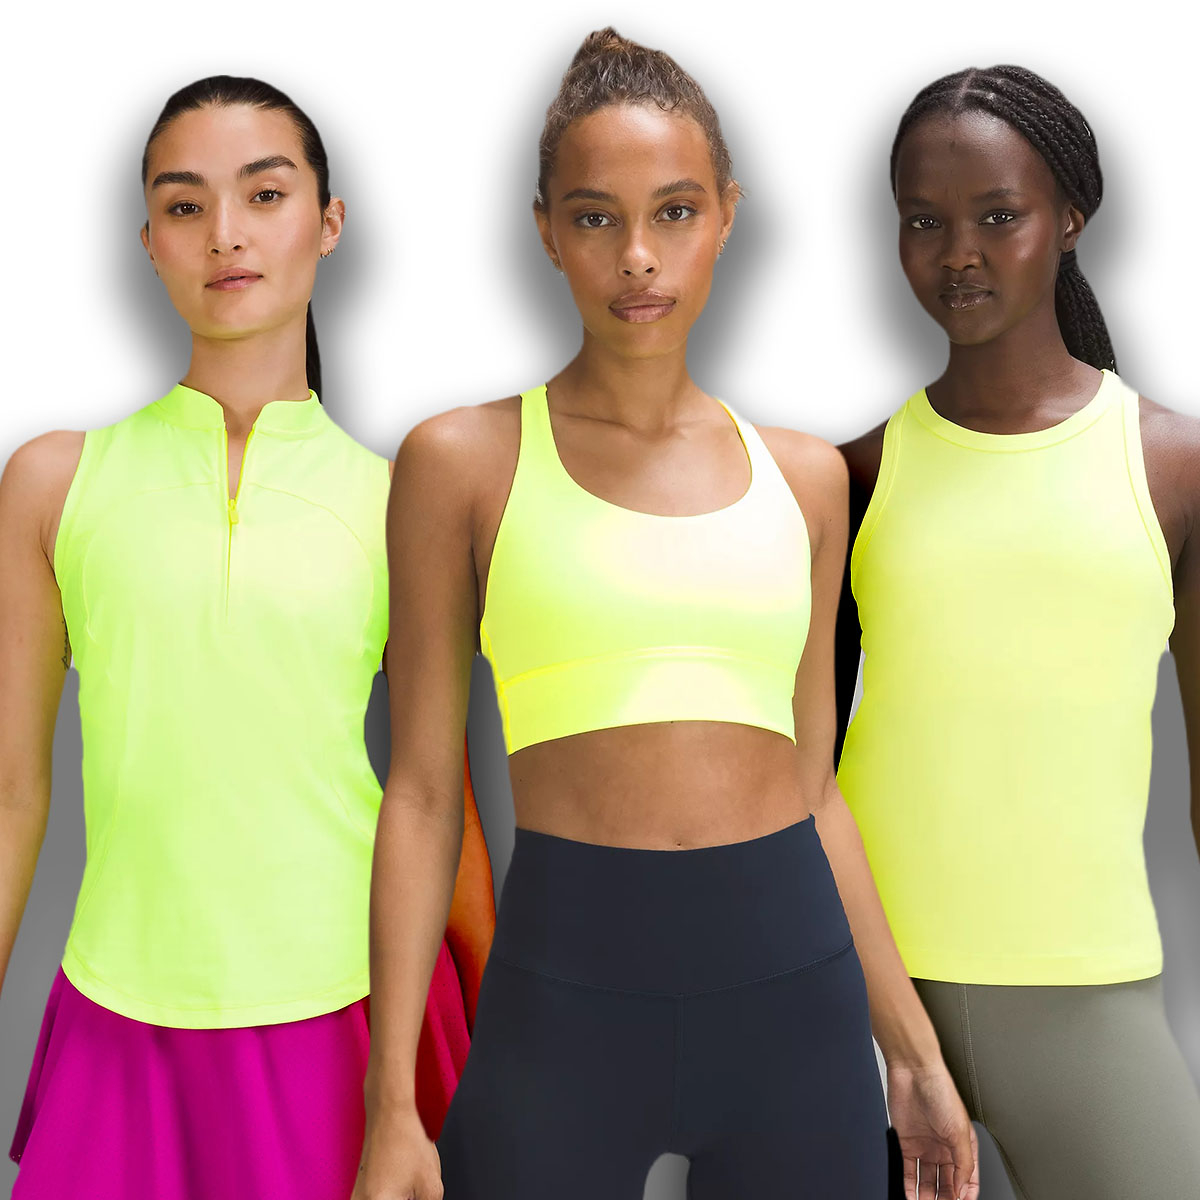 Get a $64 Lululemon Tank for $19 and More Great Buys Starting at $9